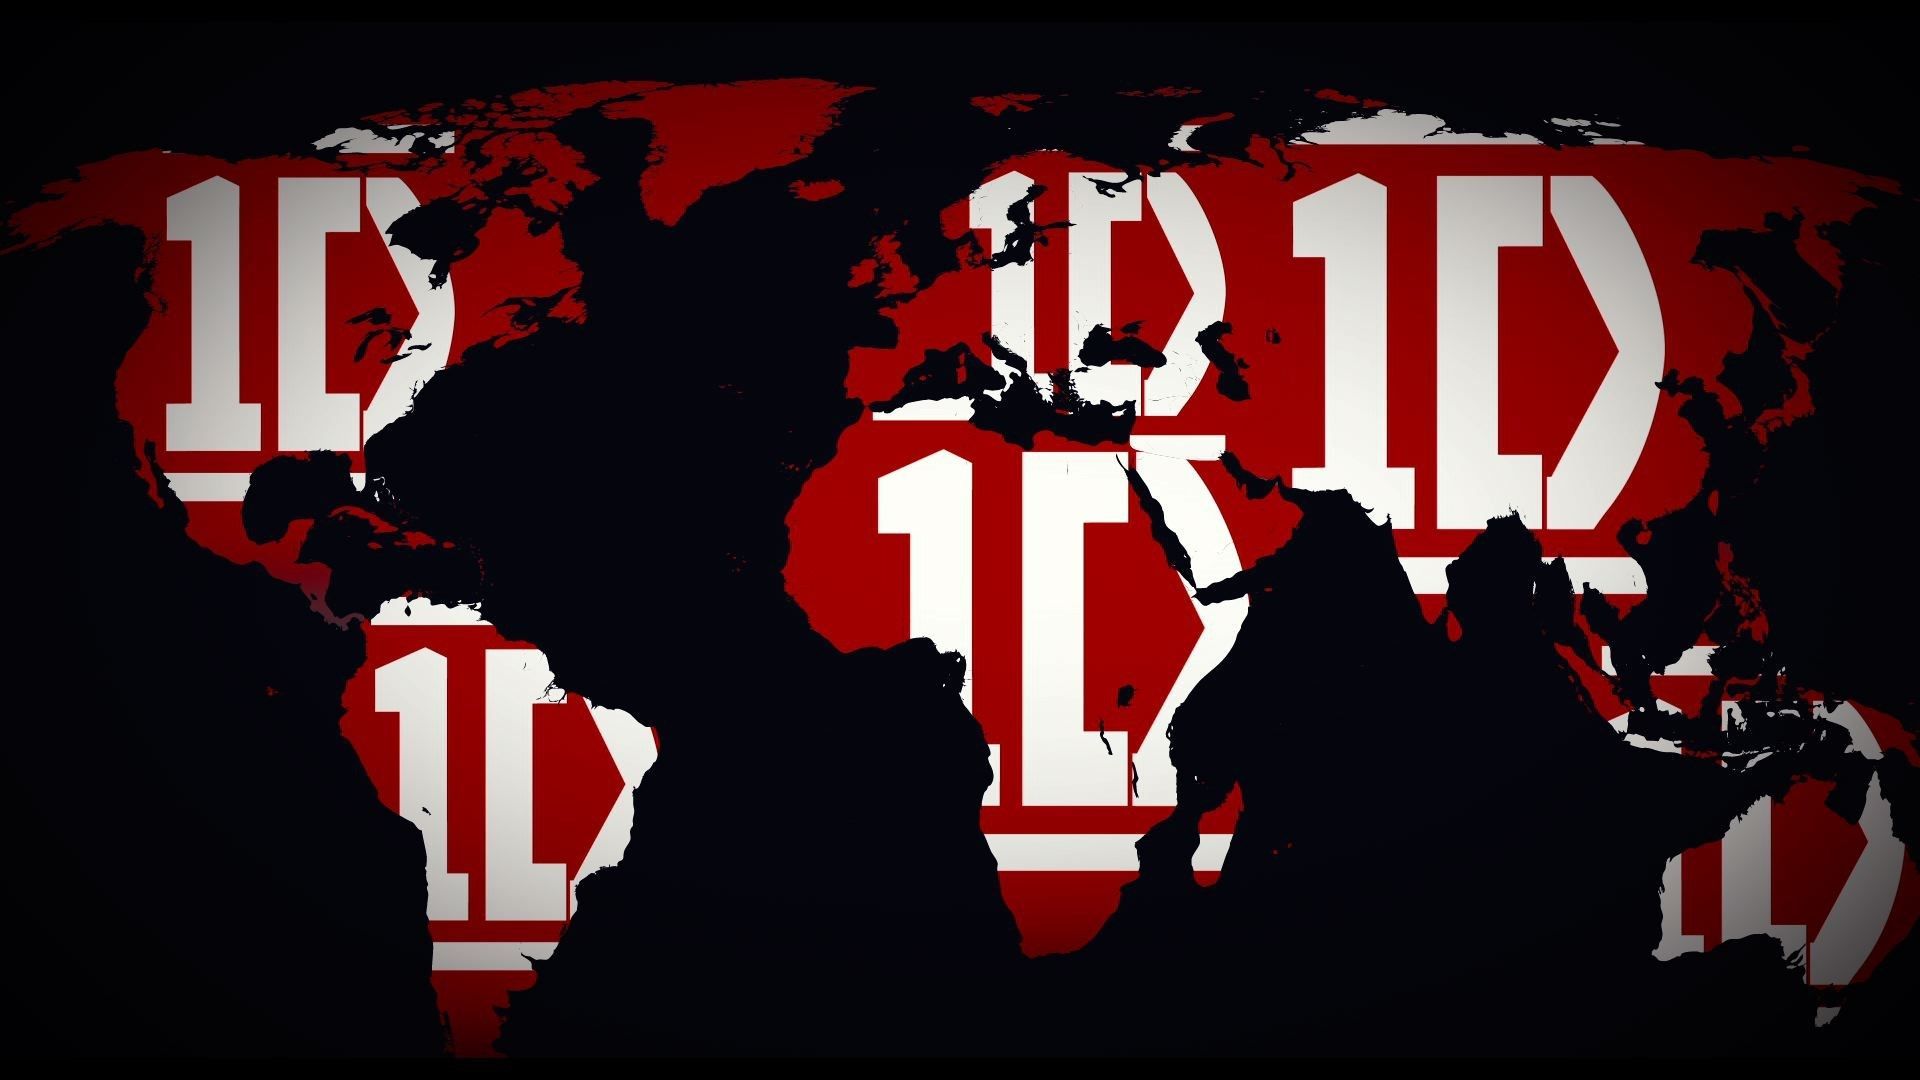 one direction HD widescreen wallpaper for laptop. One direction videos, I love one direction, One direction